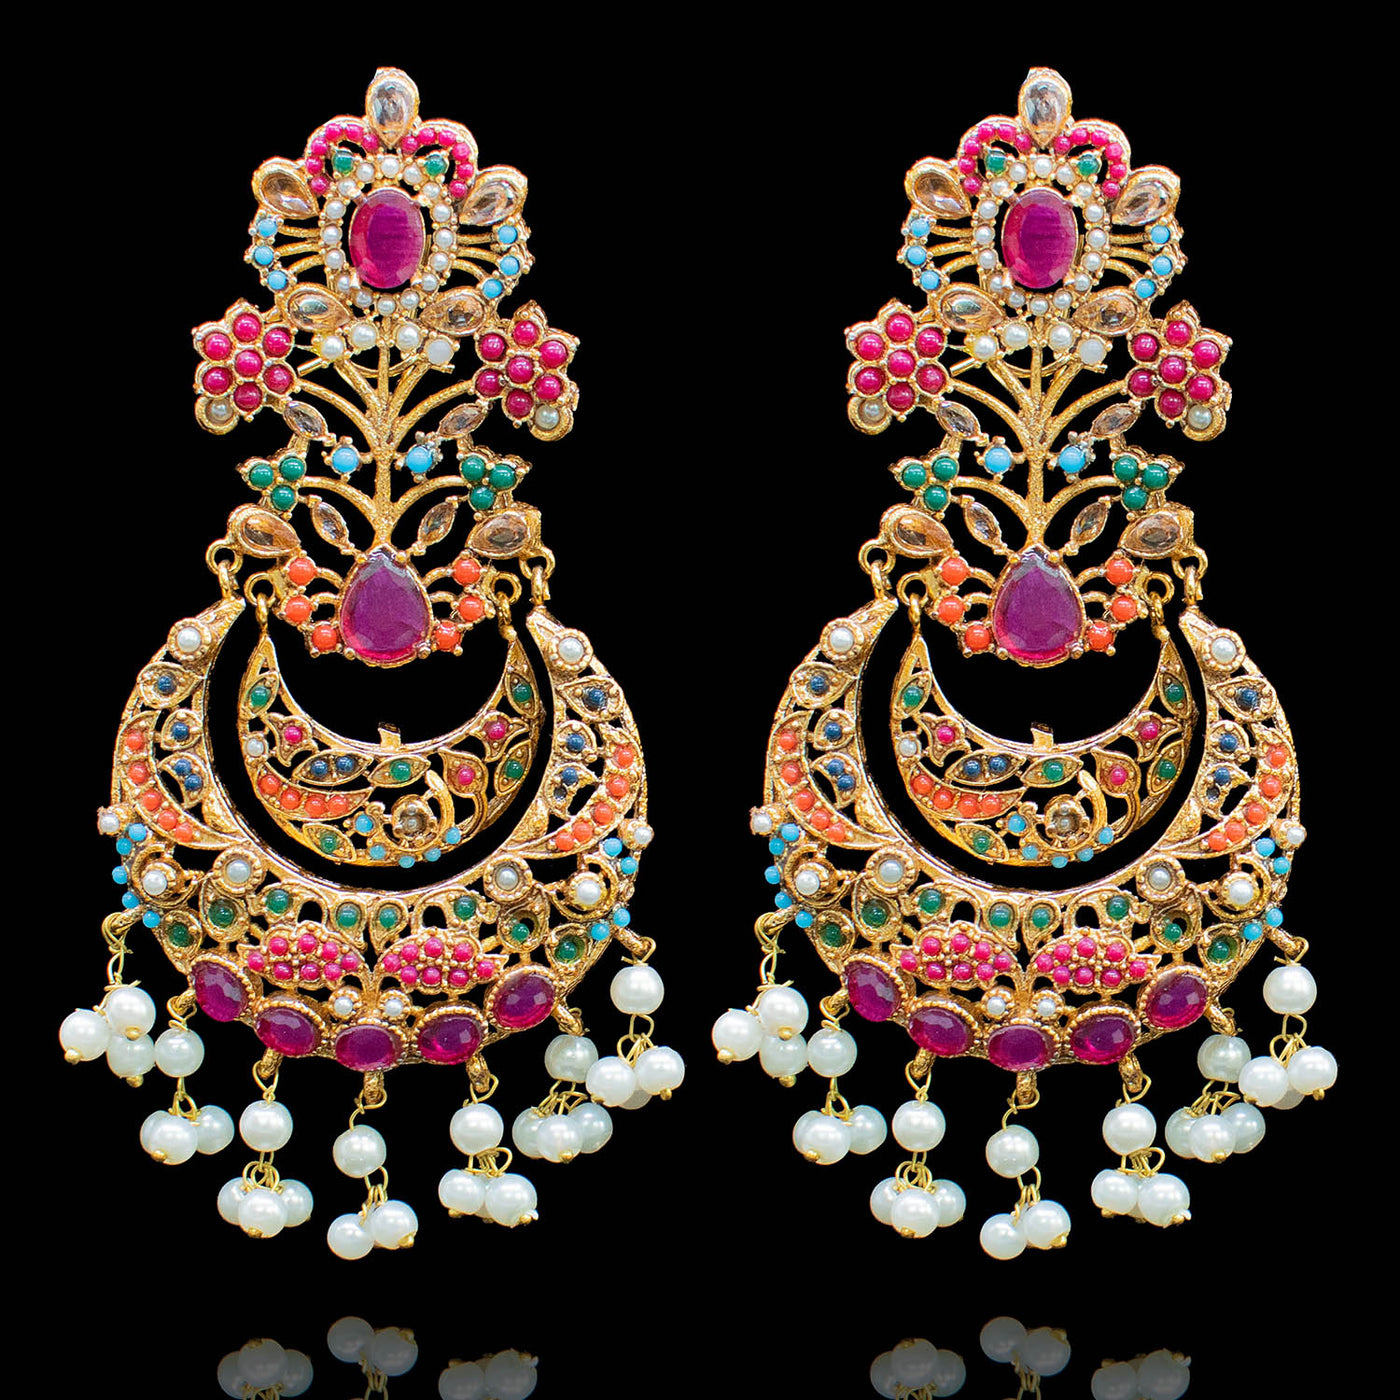 Kausar Earrings - Available in 2 Colors